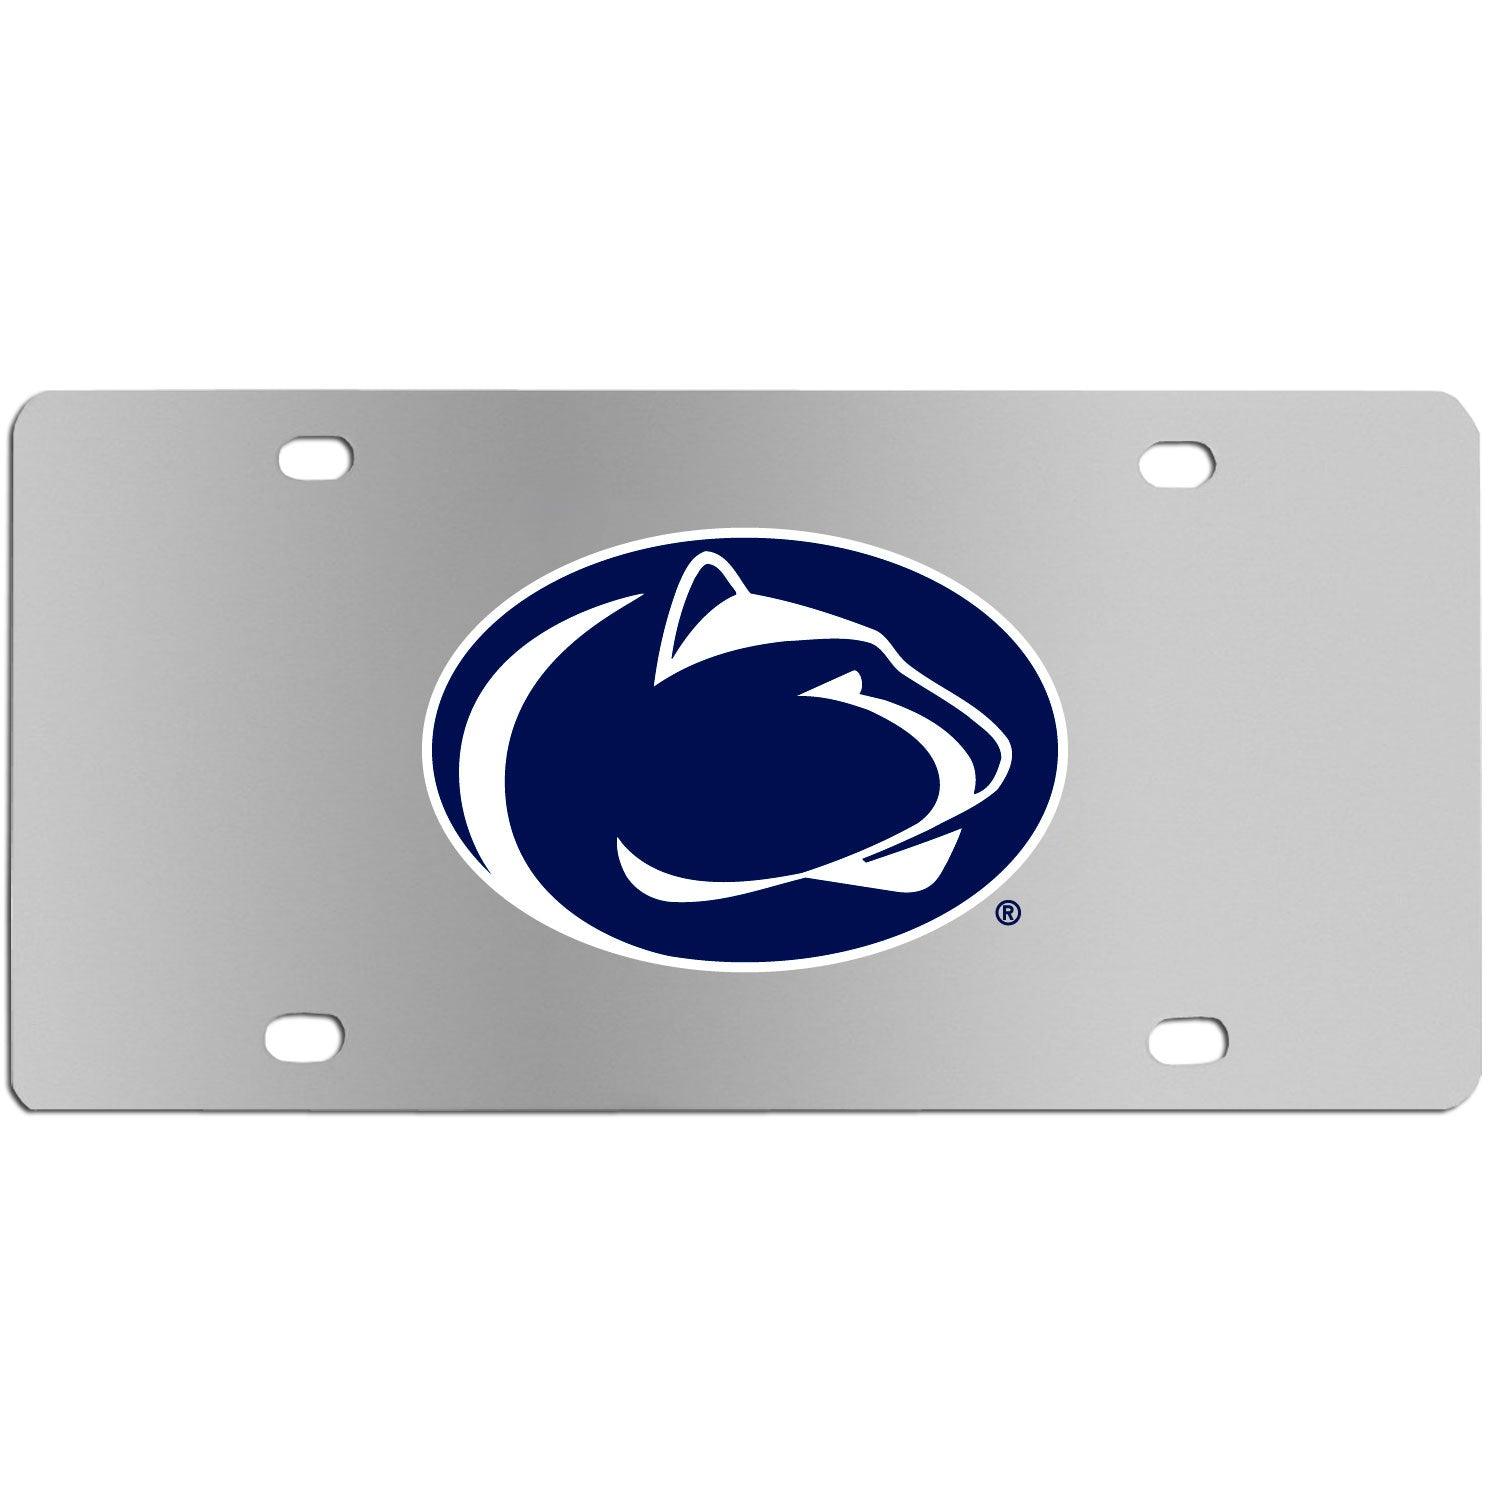 Penn St. Nittany Lions Steel License Plate Wall Plaque - Flyclothing LLC